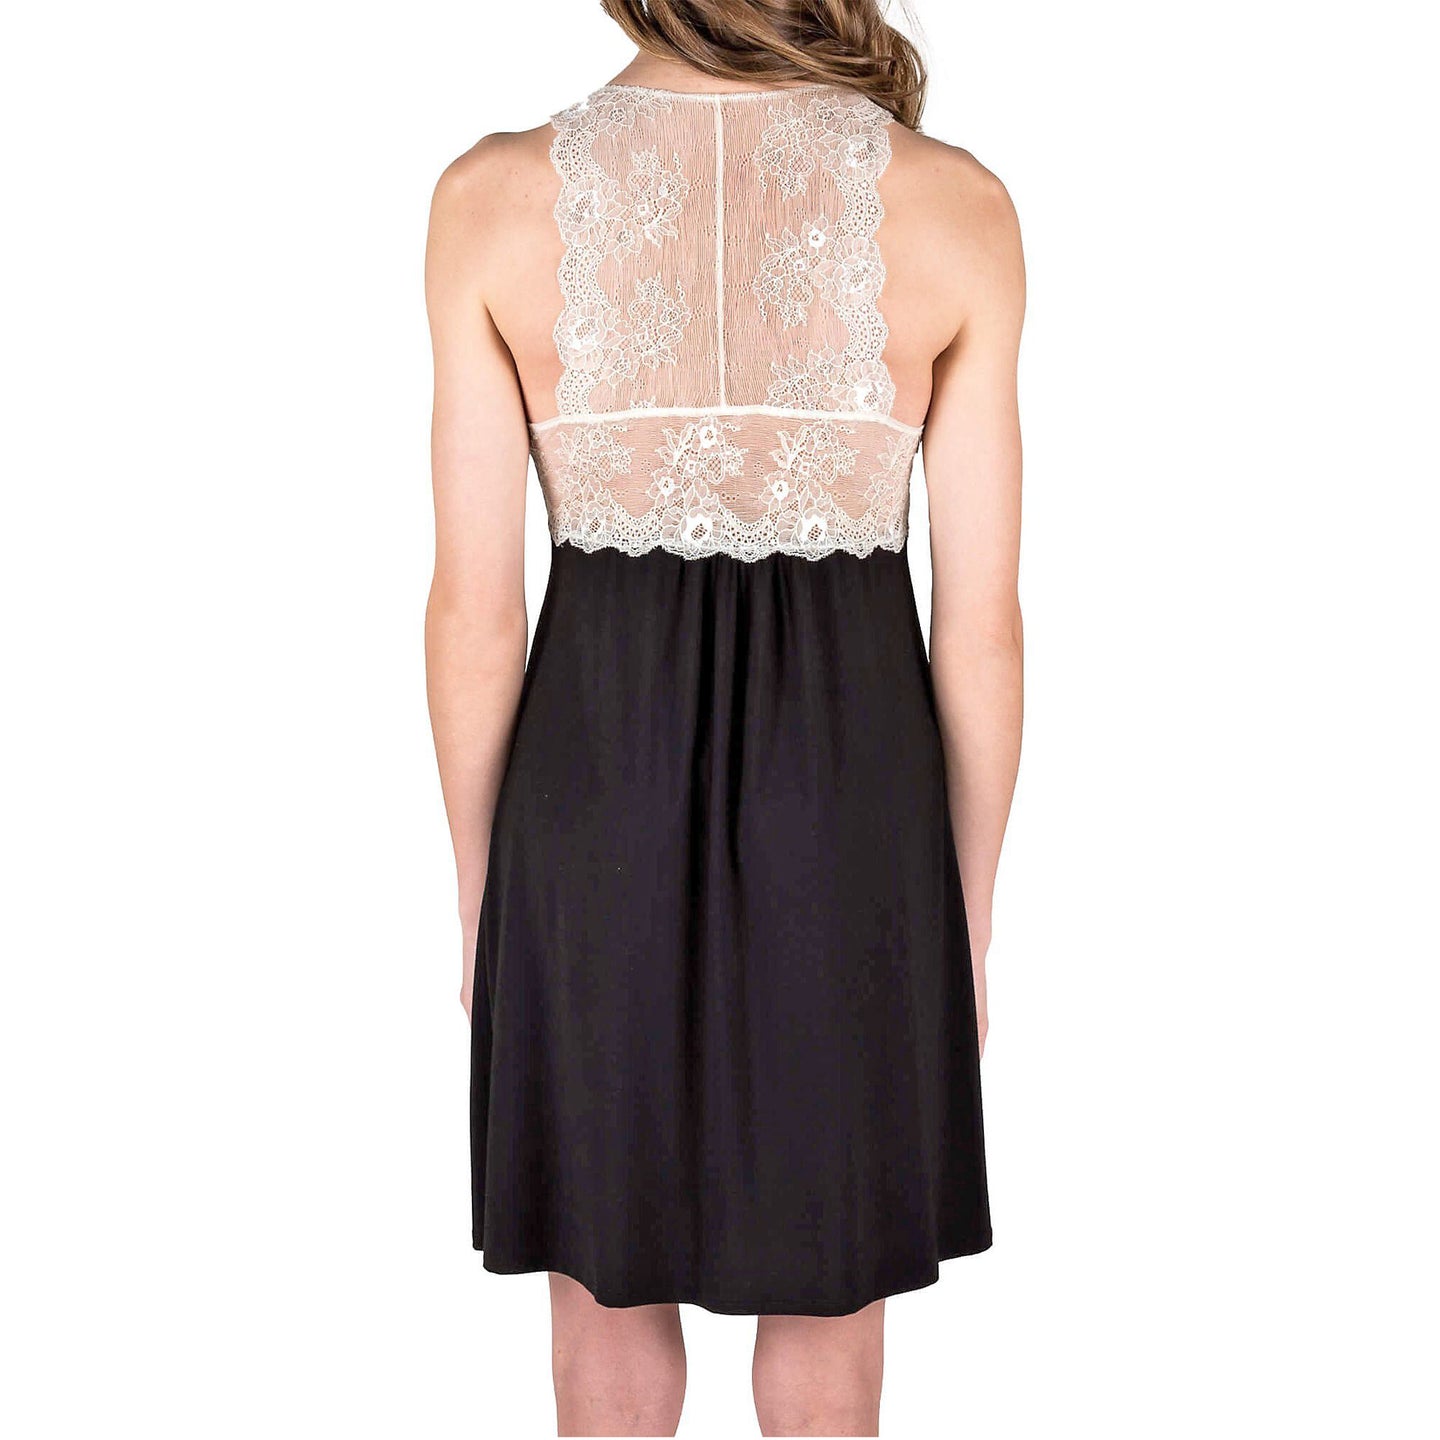 Catarina Knit Chemise Nightgown - Black with Ecru Lace Mystique Intimates